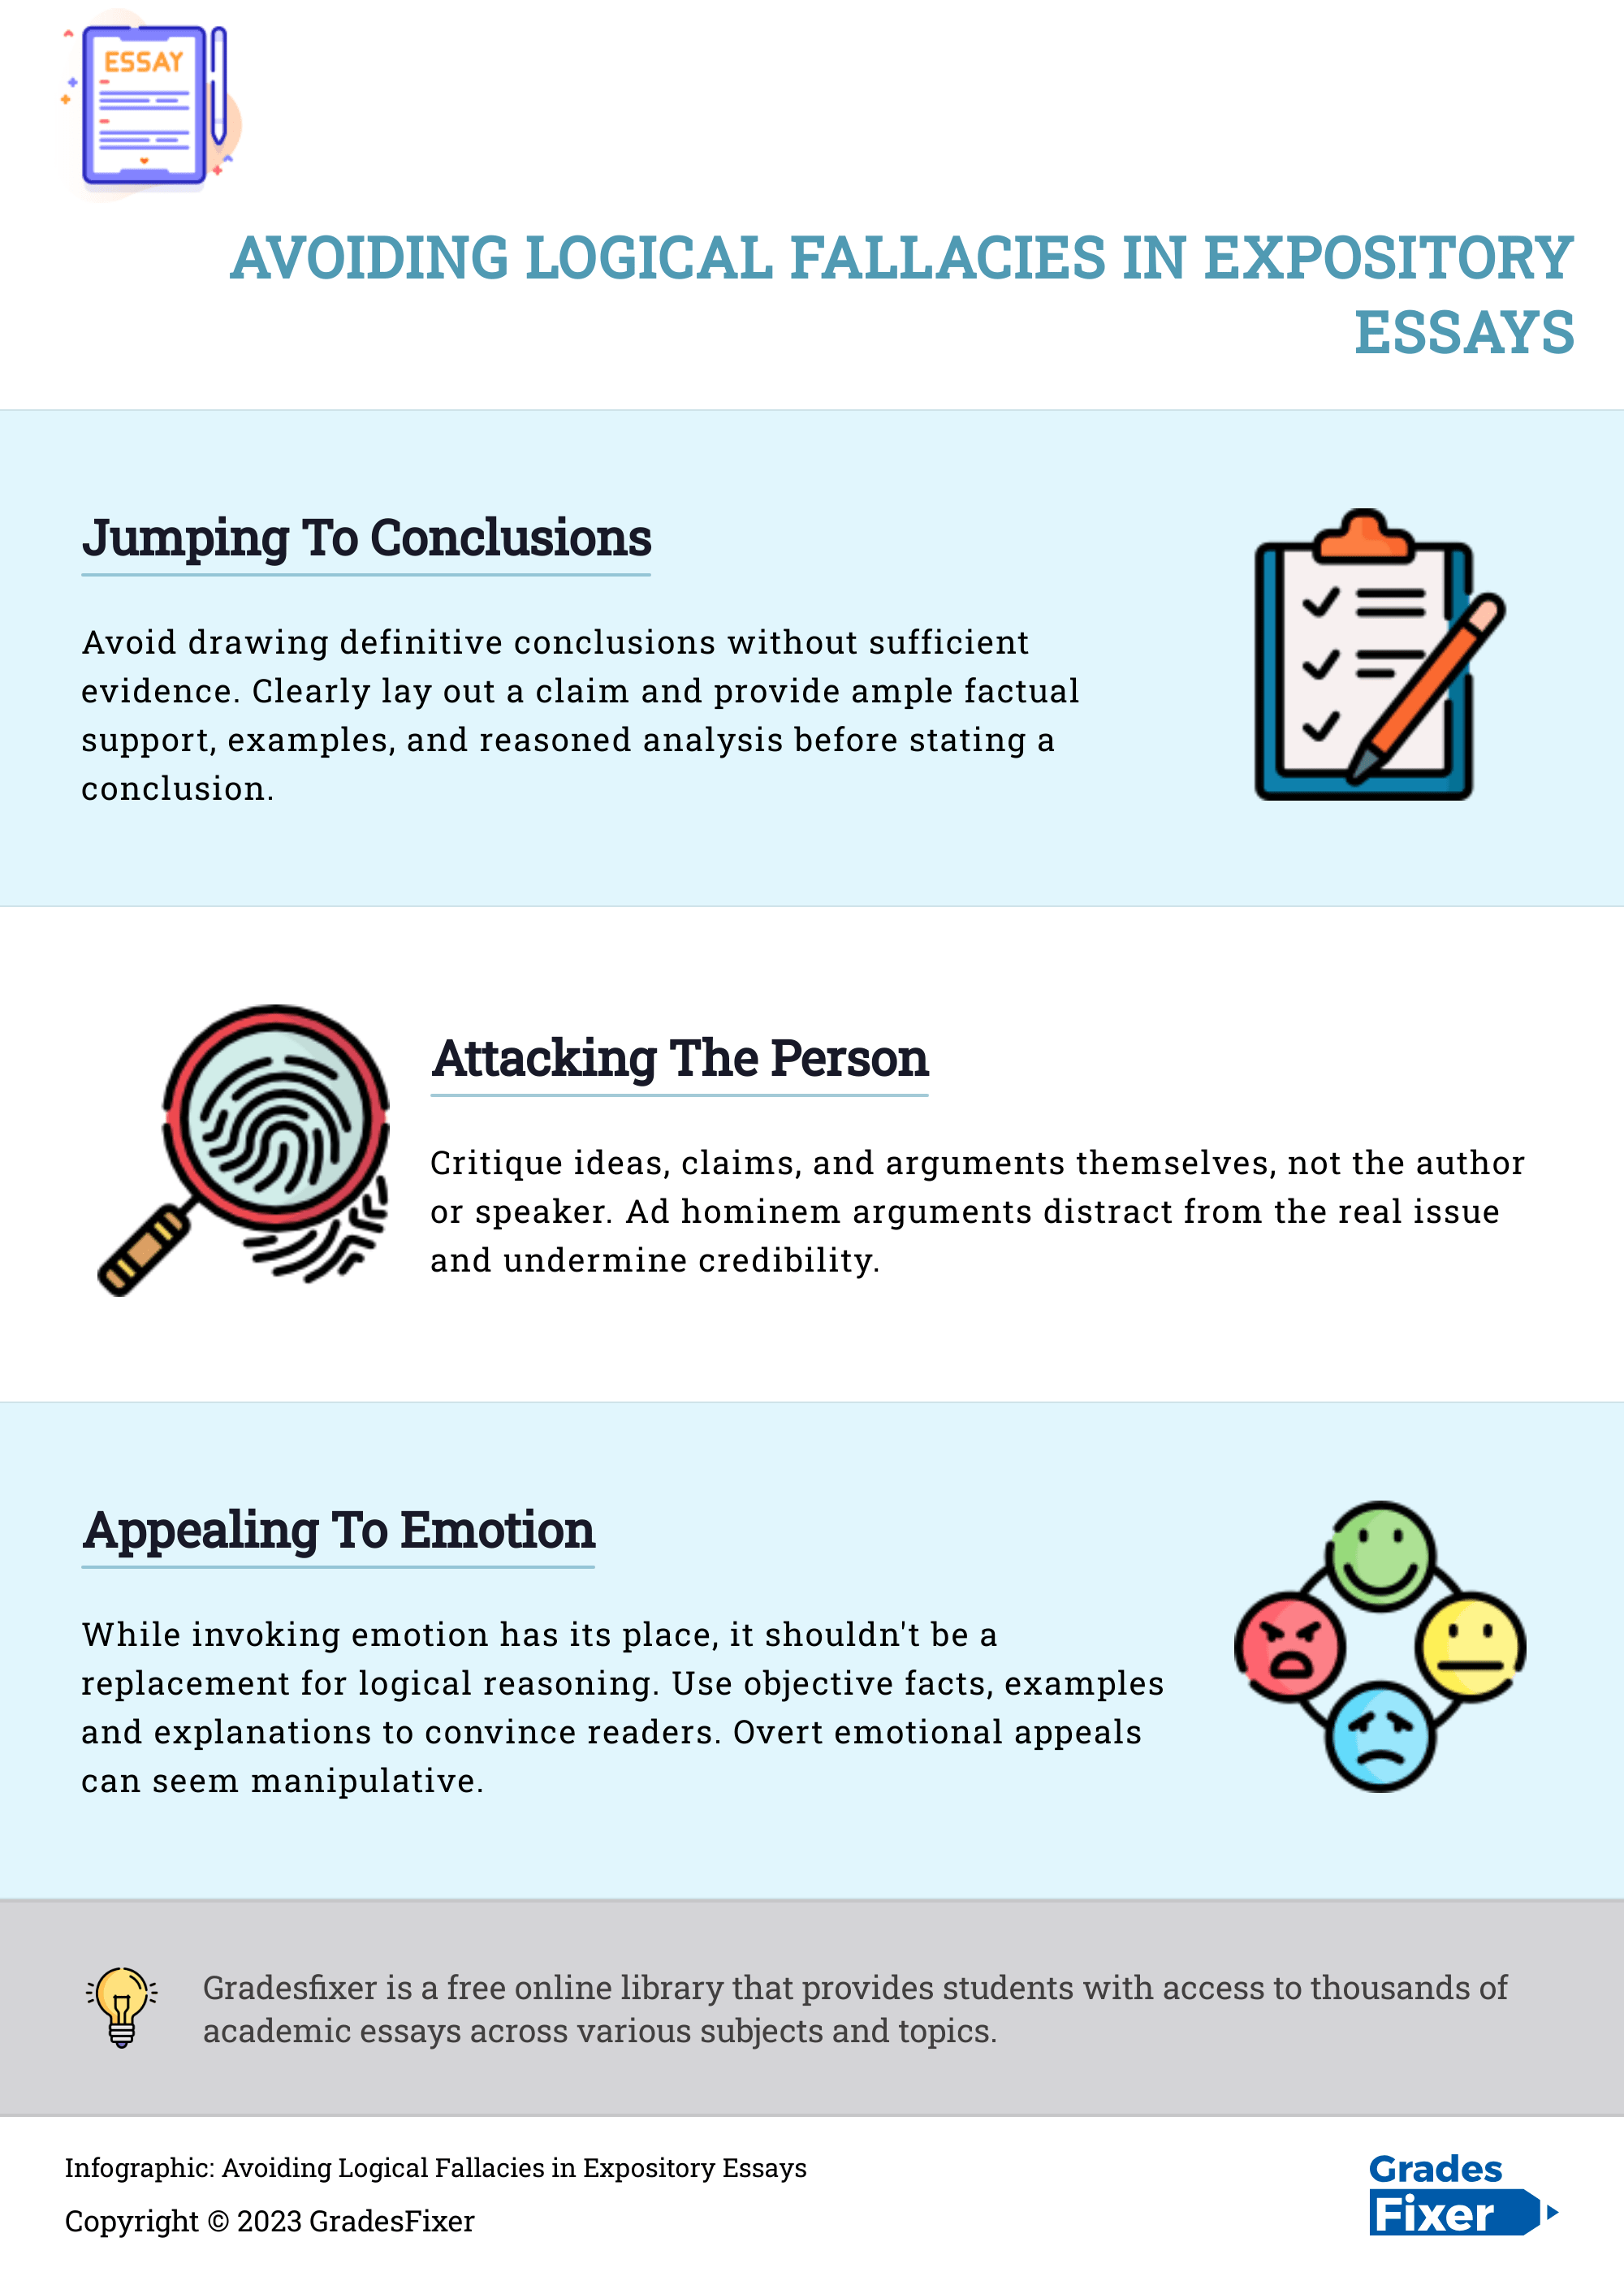 Infographic Avoiding Logical-Fallacies in Expository Essays